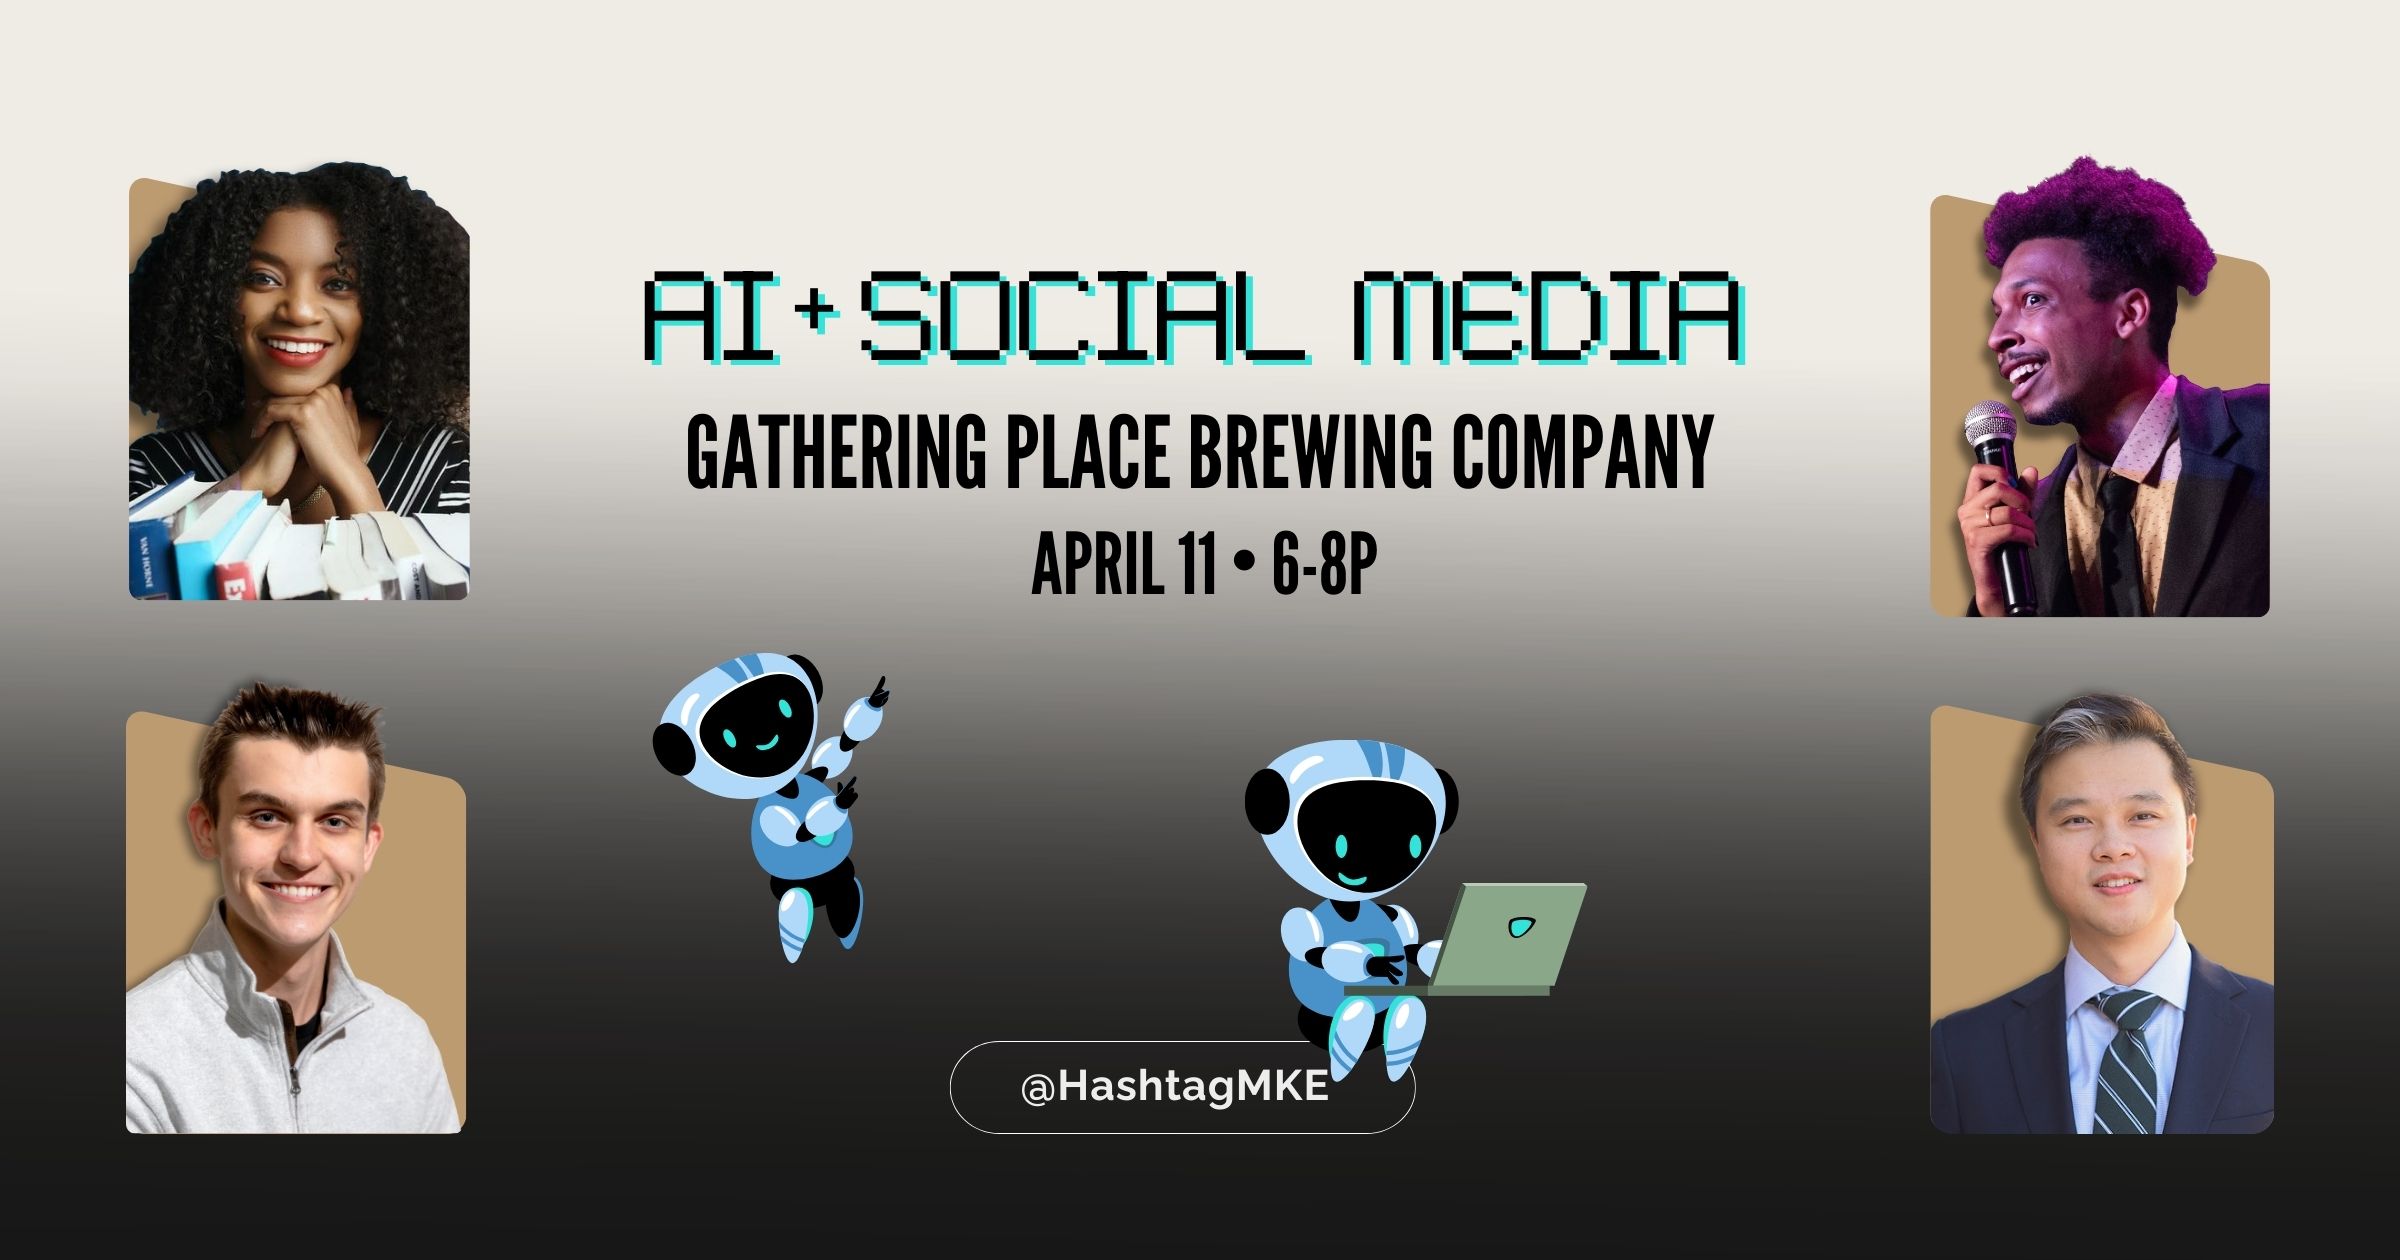 "A.I. and social media at Gathering Place Brewing Company on April 11th from 6 to 8 p.m." Four headshots included of guests attending the event and two cartoon robots are placed on the graphic.